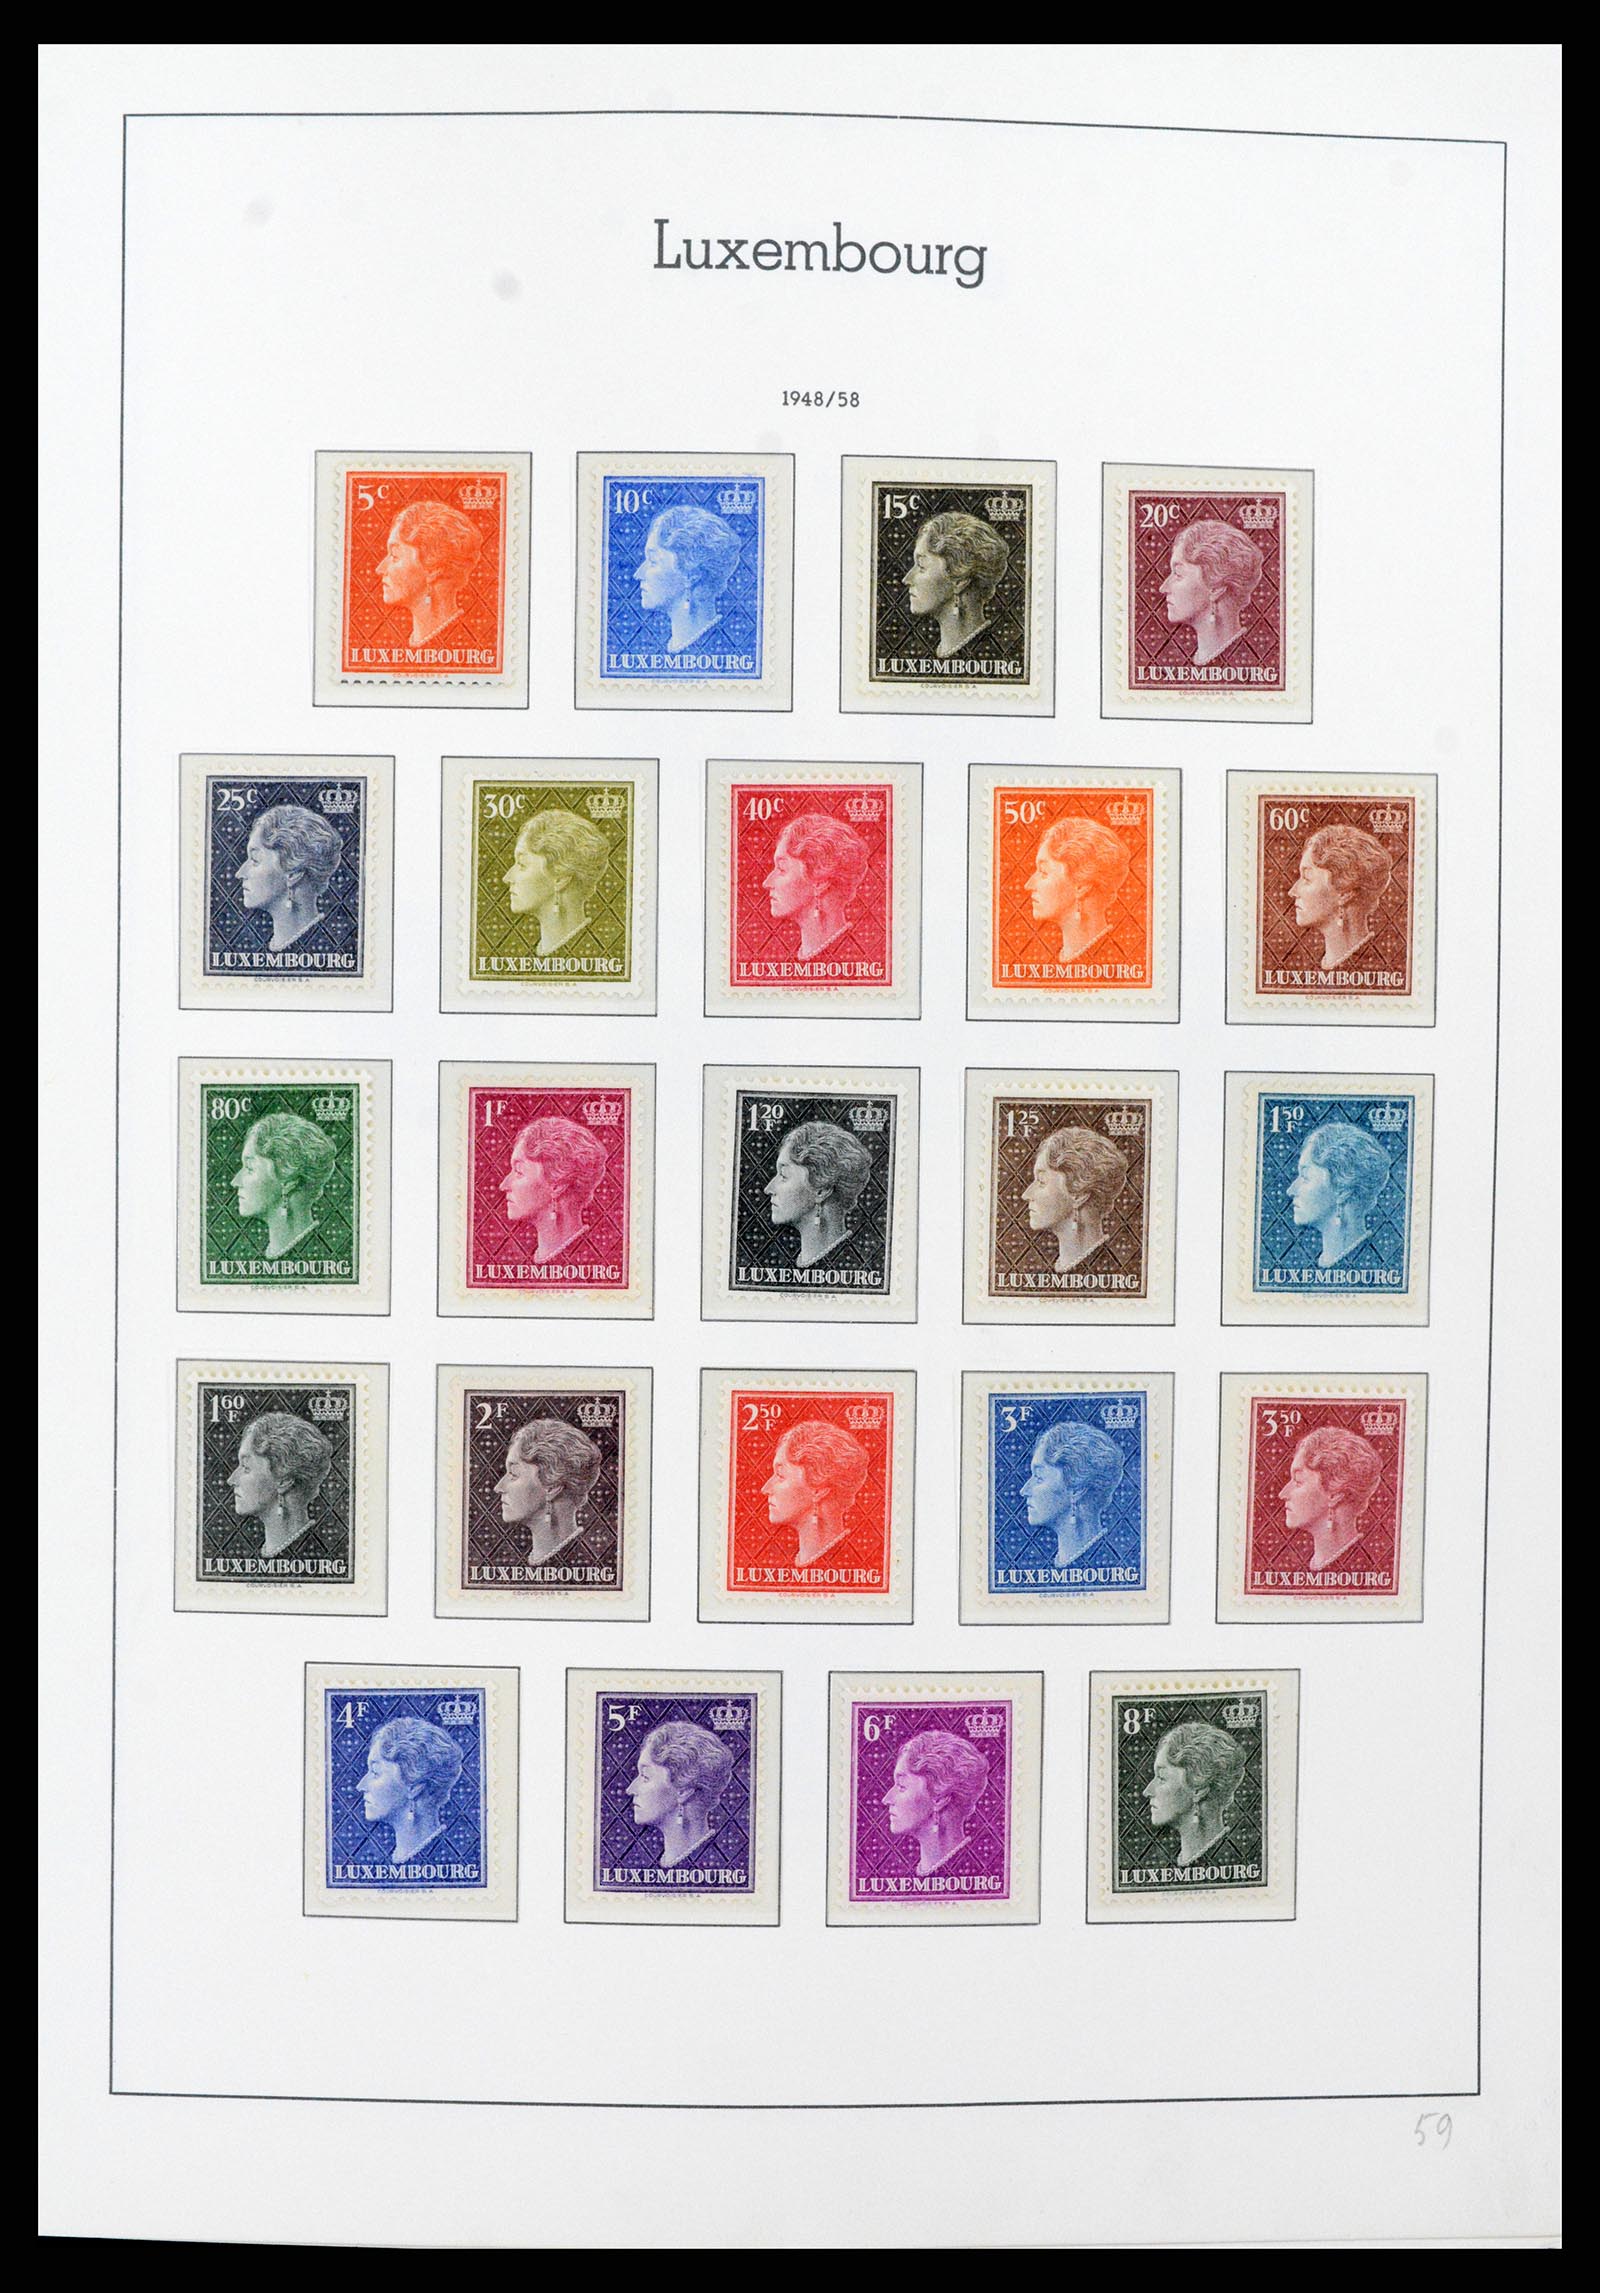 37592 042 - Stamp collection 37592 Luxembourg 1852-1999.